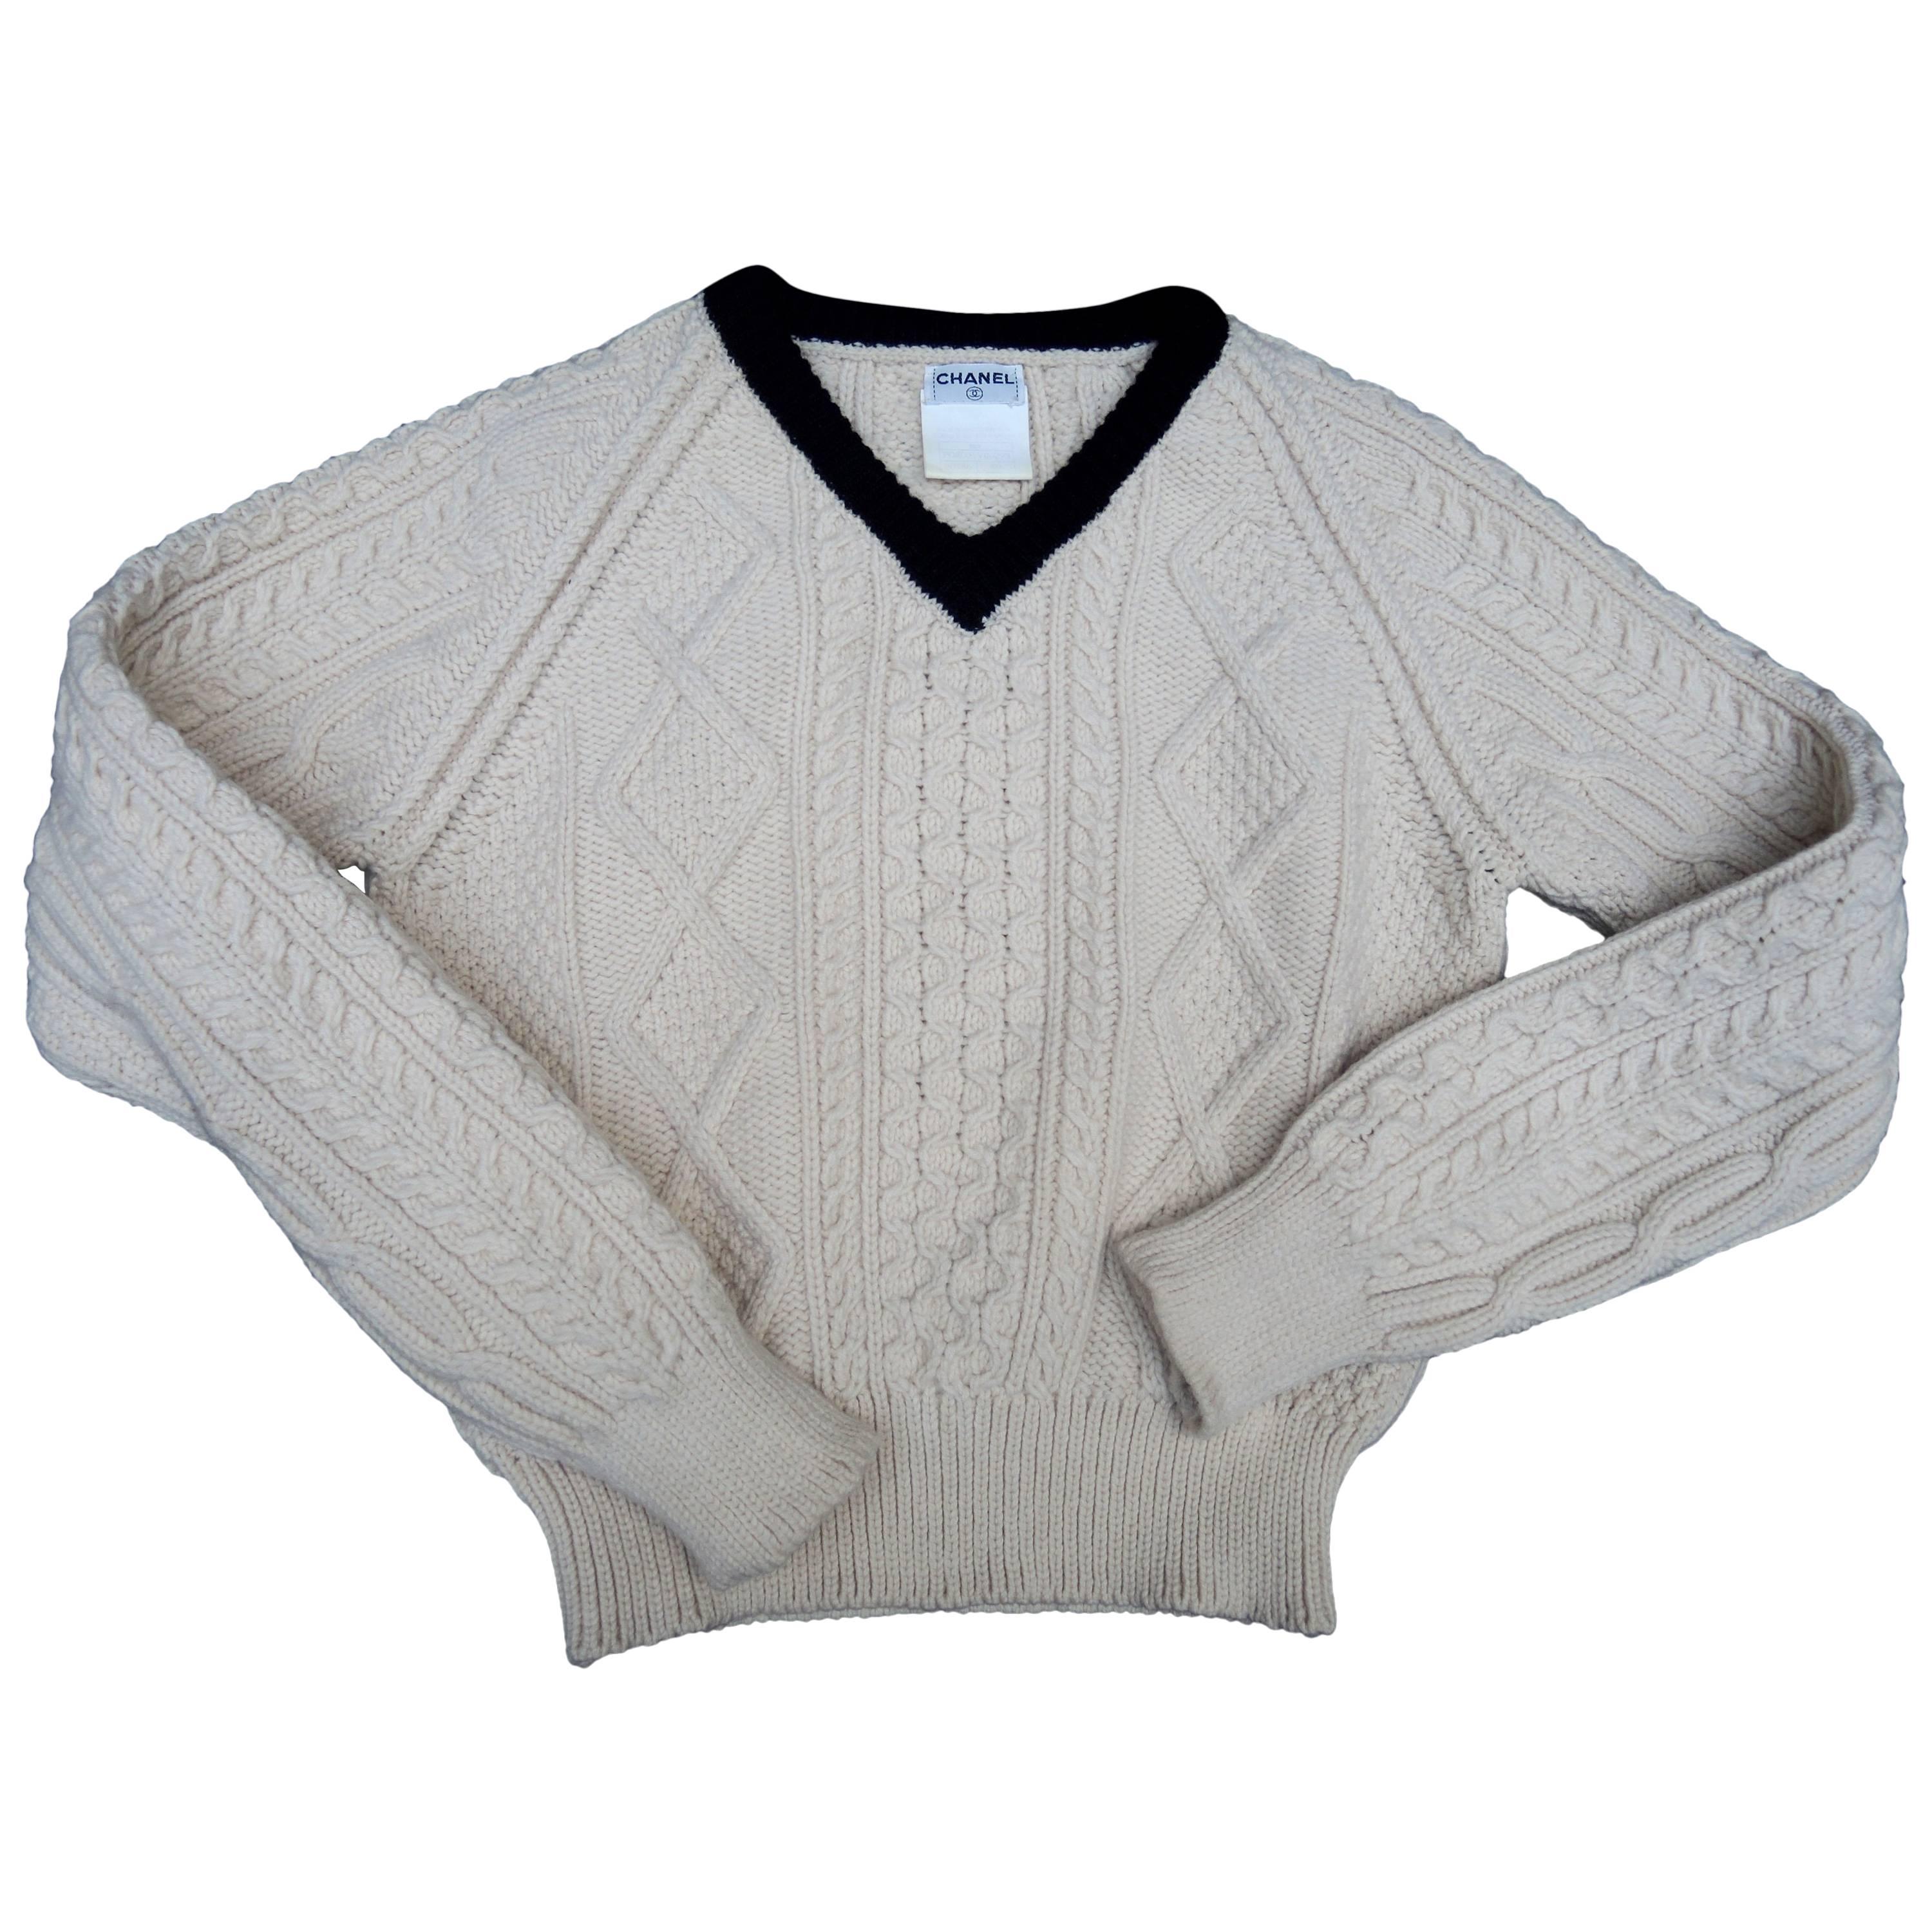 A Chanel handknit V neck wool sweater from 1999. The wool is soft and the design is an updated figure flattering rendition of the Classic English fishermans sweater.
marked as a size 40, but it is a perfect fit for a 38.